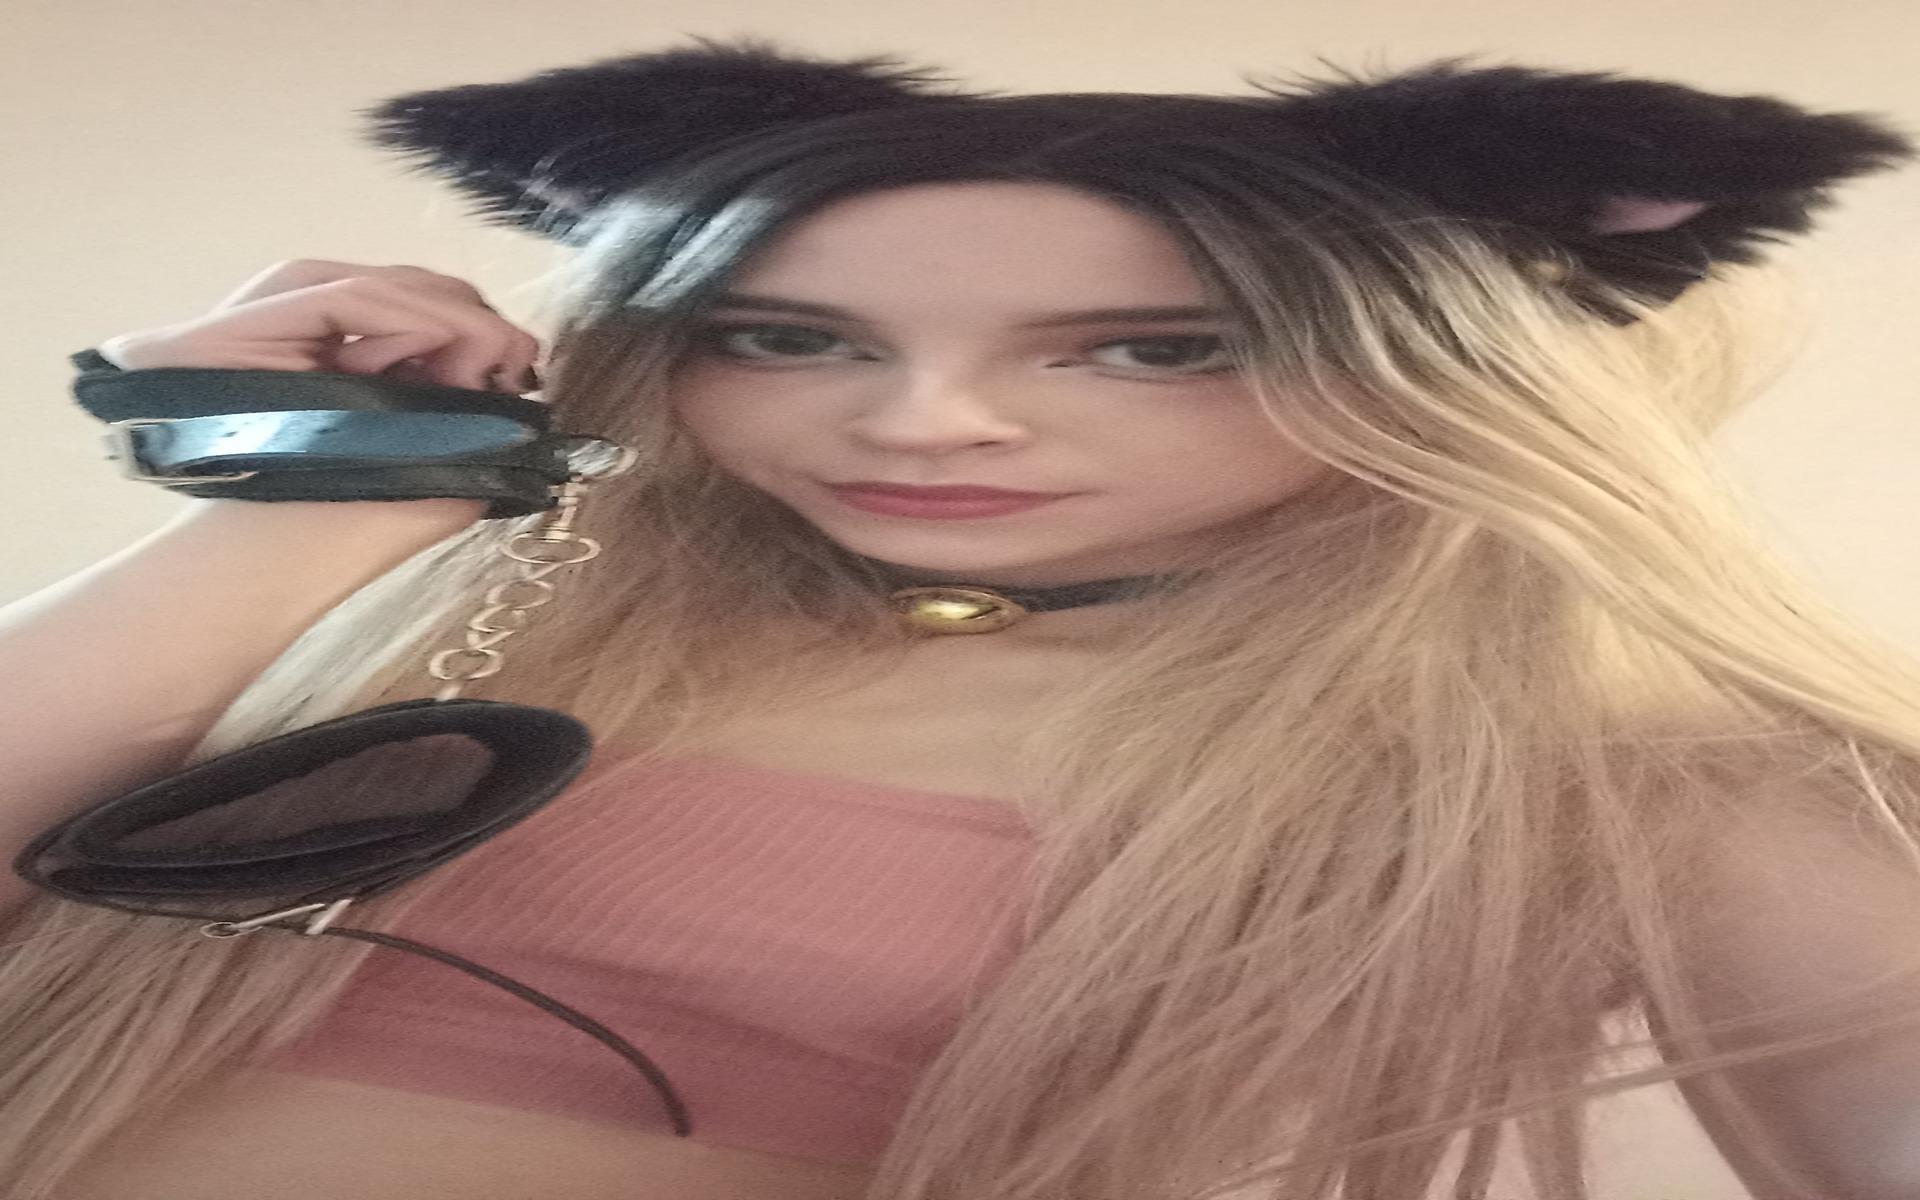 Image of cam model AnastaSexy from XloveCam